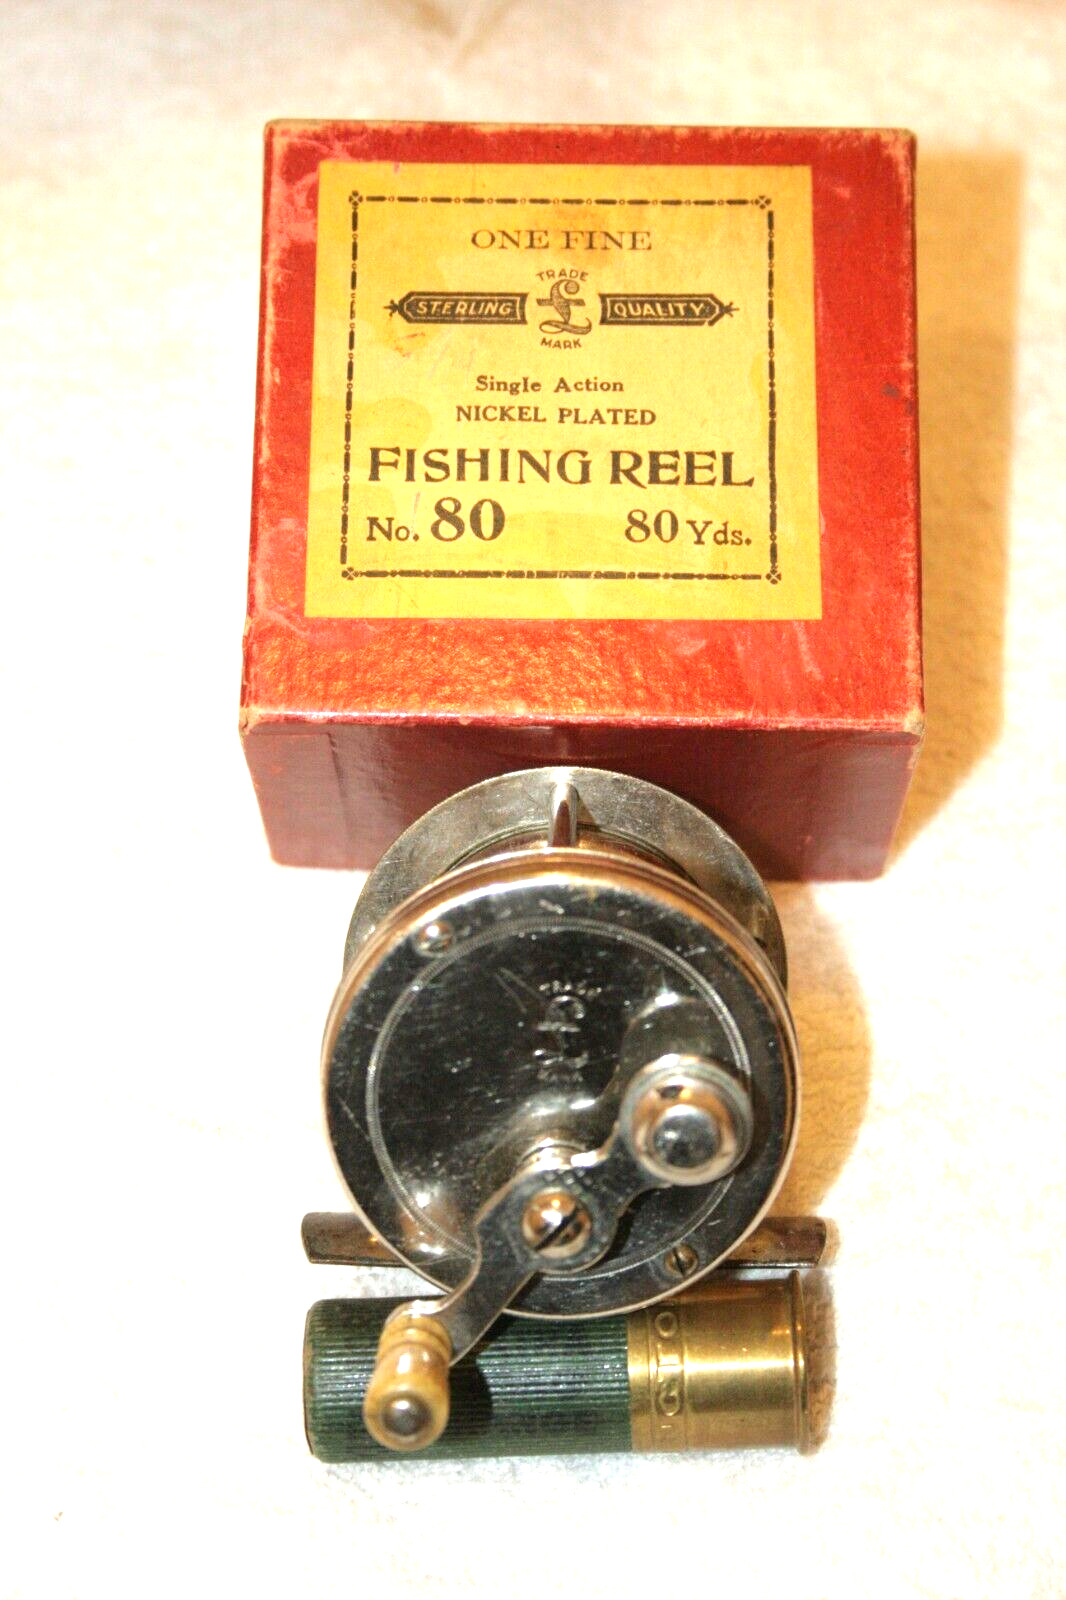 VINTAGE FISHING REEL One Fine STERLING 80 with original box